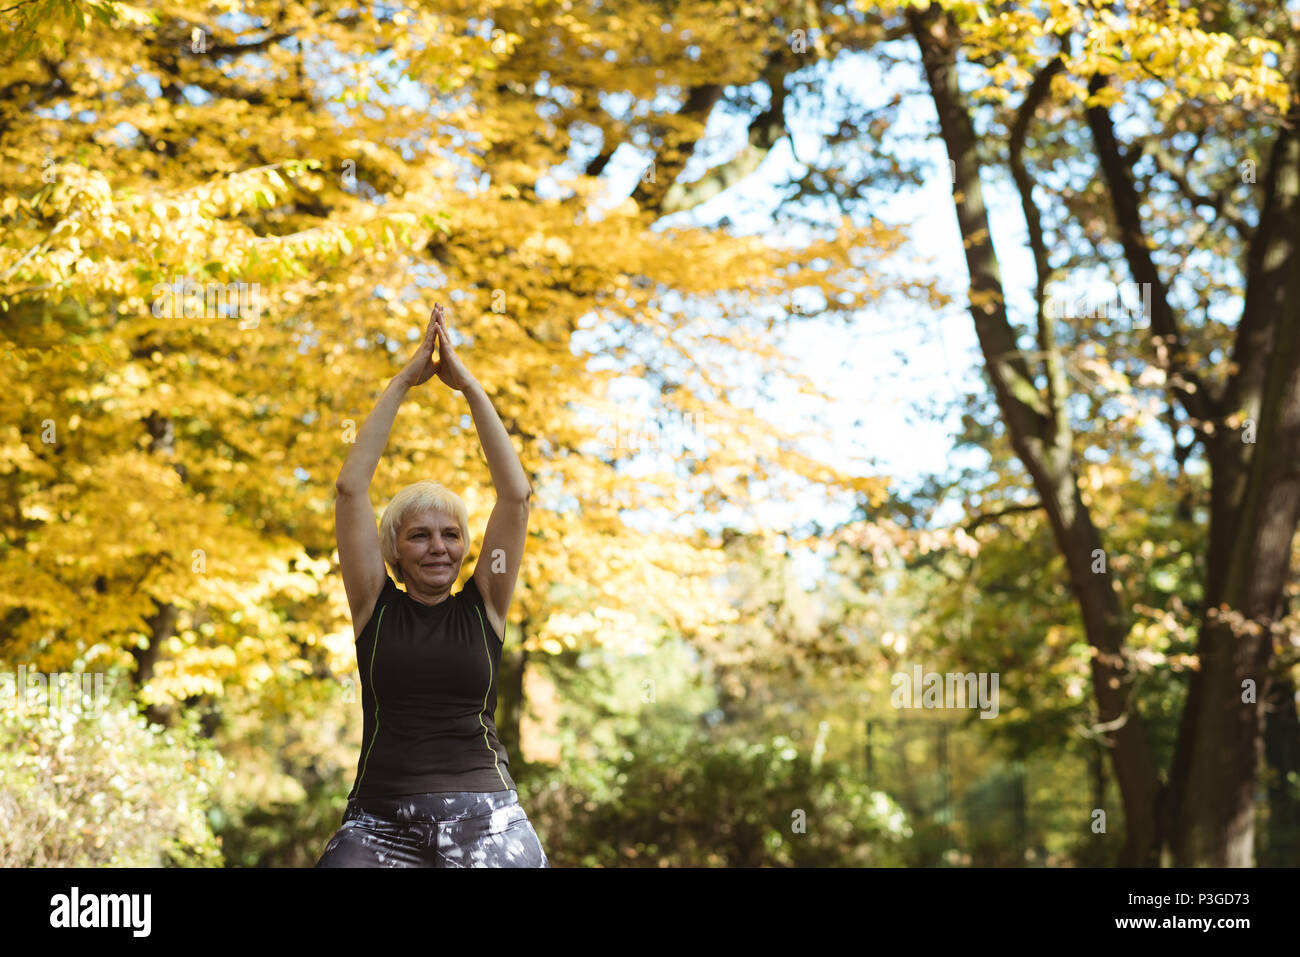 Senior woman practicing yoga in a park Banque D'Images